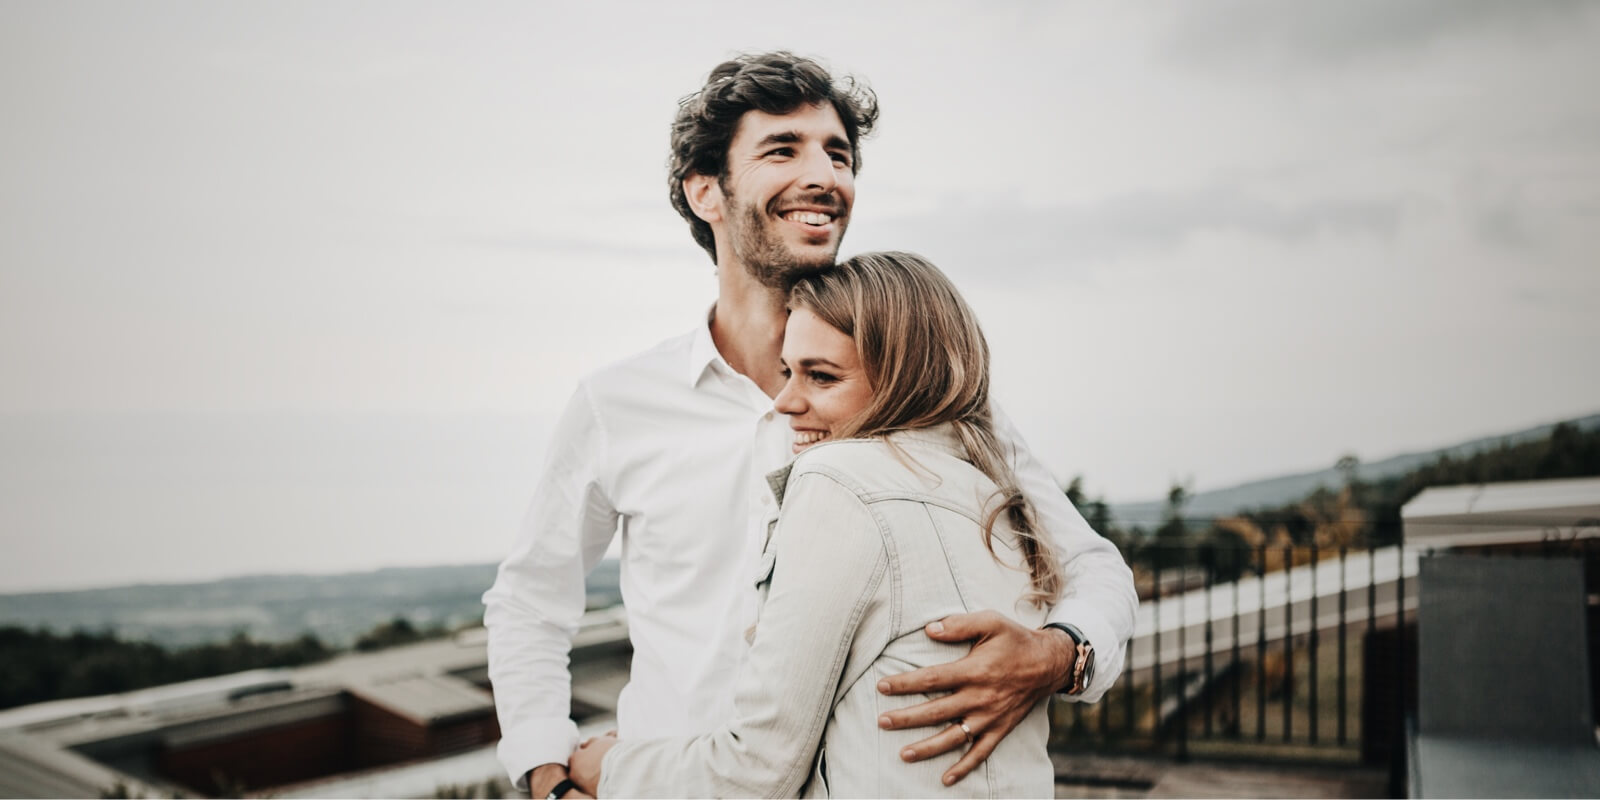 Happy Together: 3 Principles for a Stronger Romantic Relationship